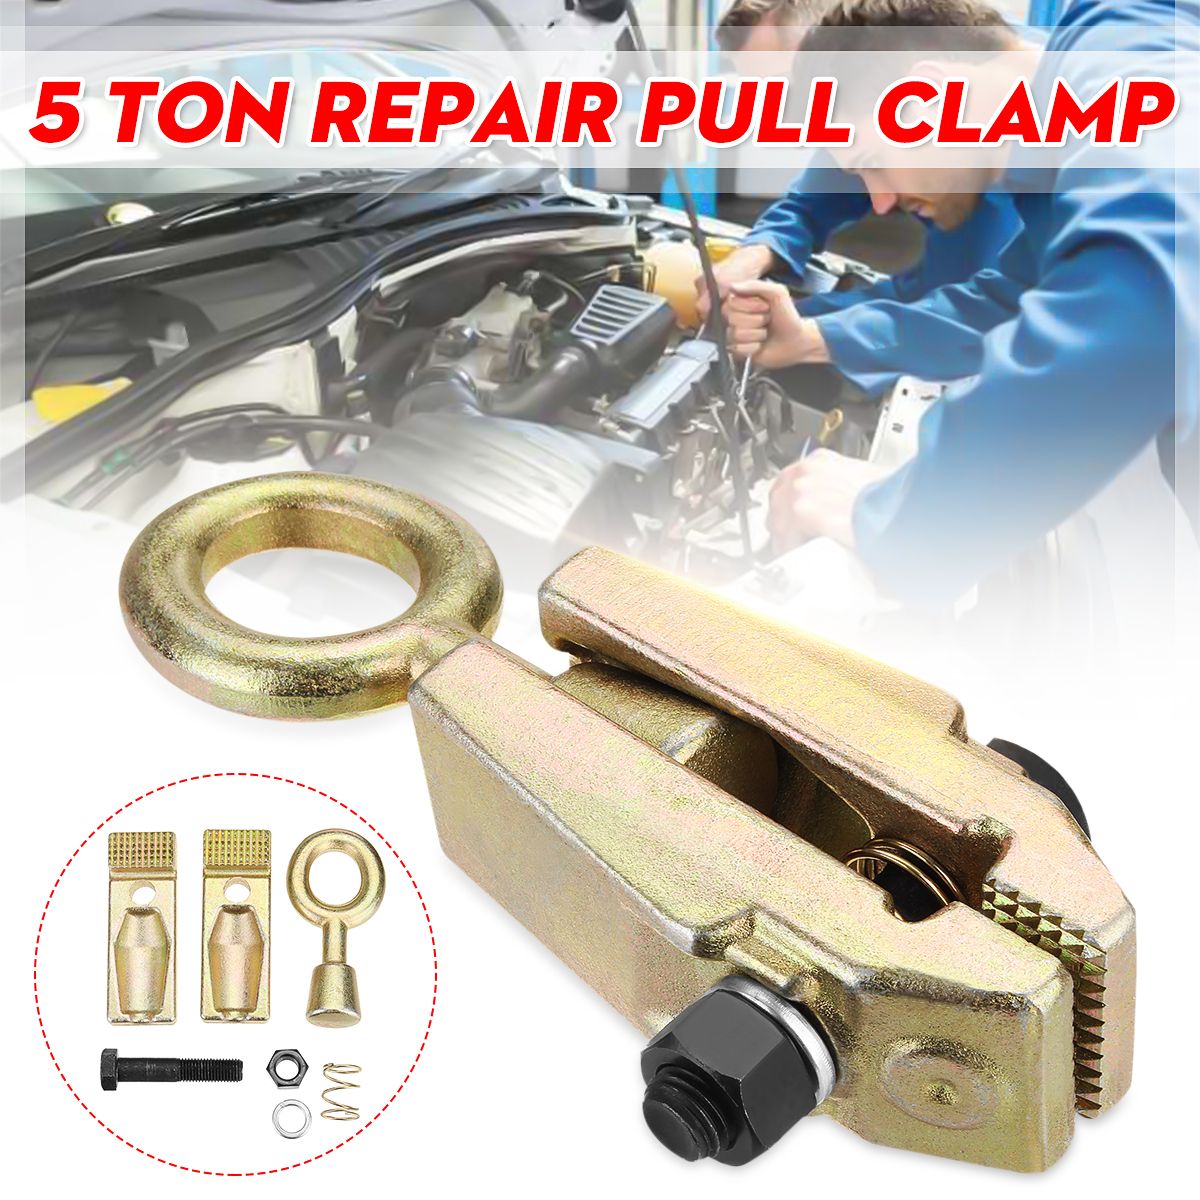 5-Ton-Repair-Pull-Clamp-Grips-Self-Tightening-Auto-Body-Single-Way-Frame-Back-1467460